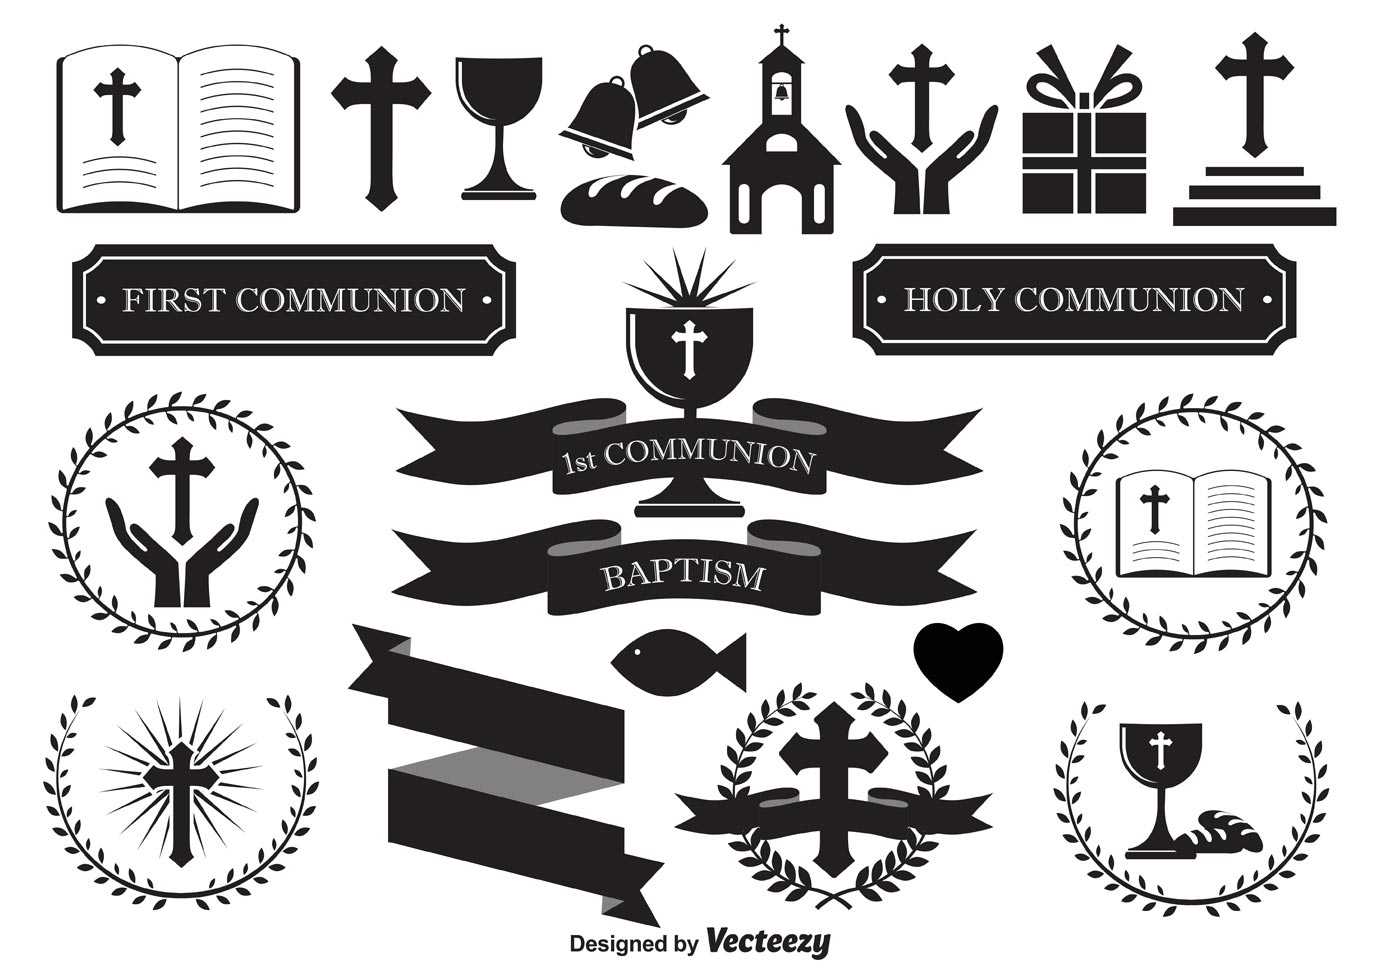 First Communion Free Vector Art – (882 Free Downloads) Throughout First Communion Banner Templates